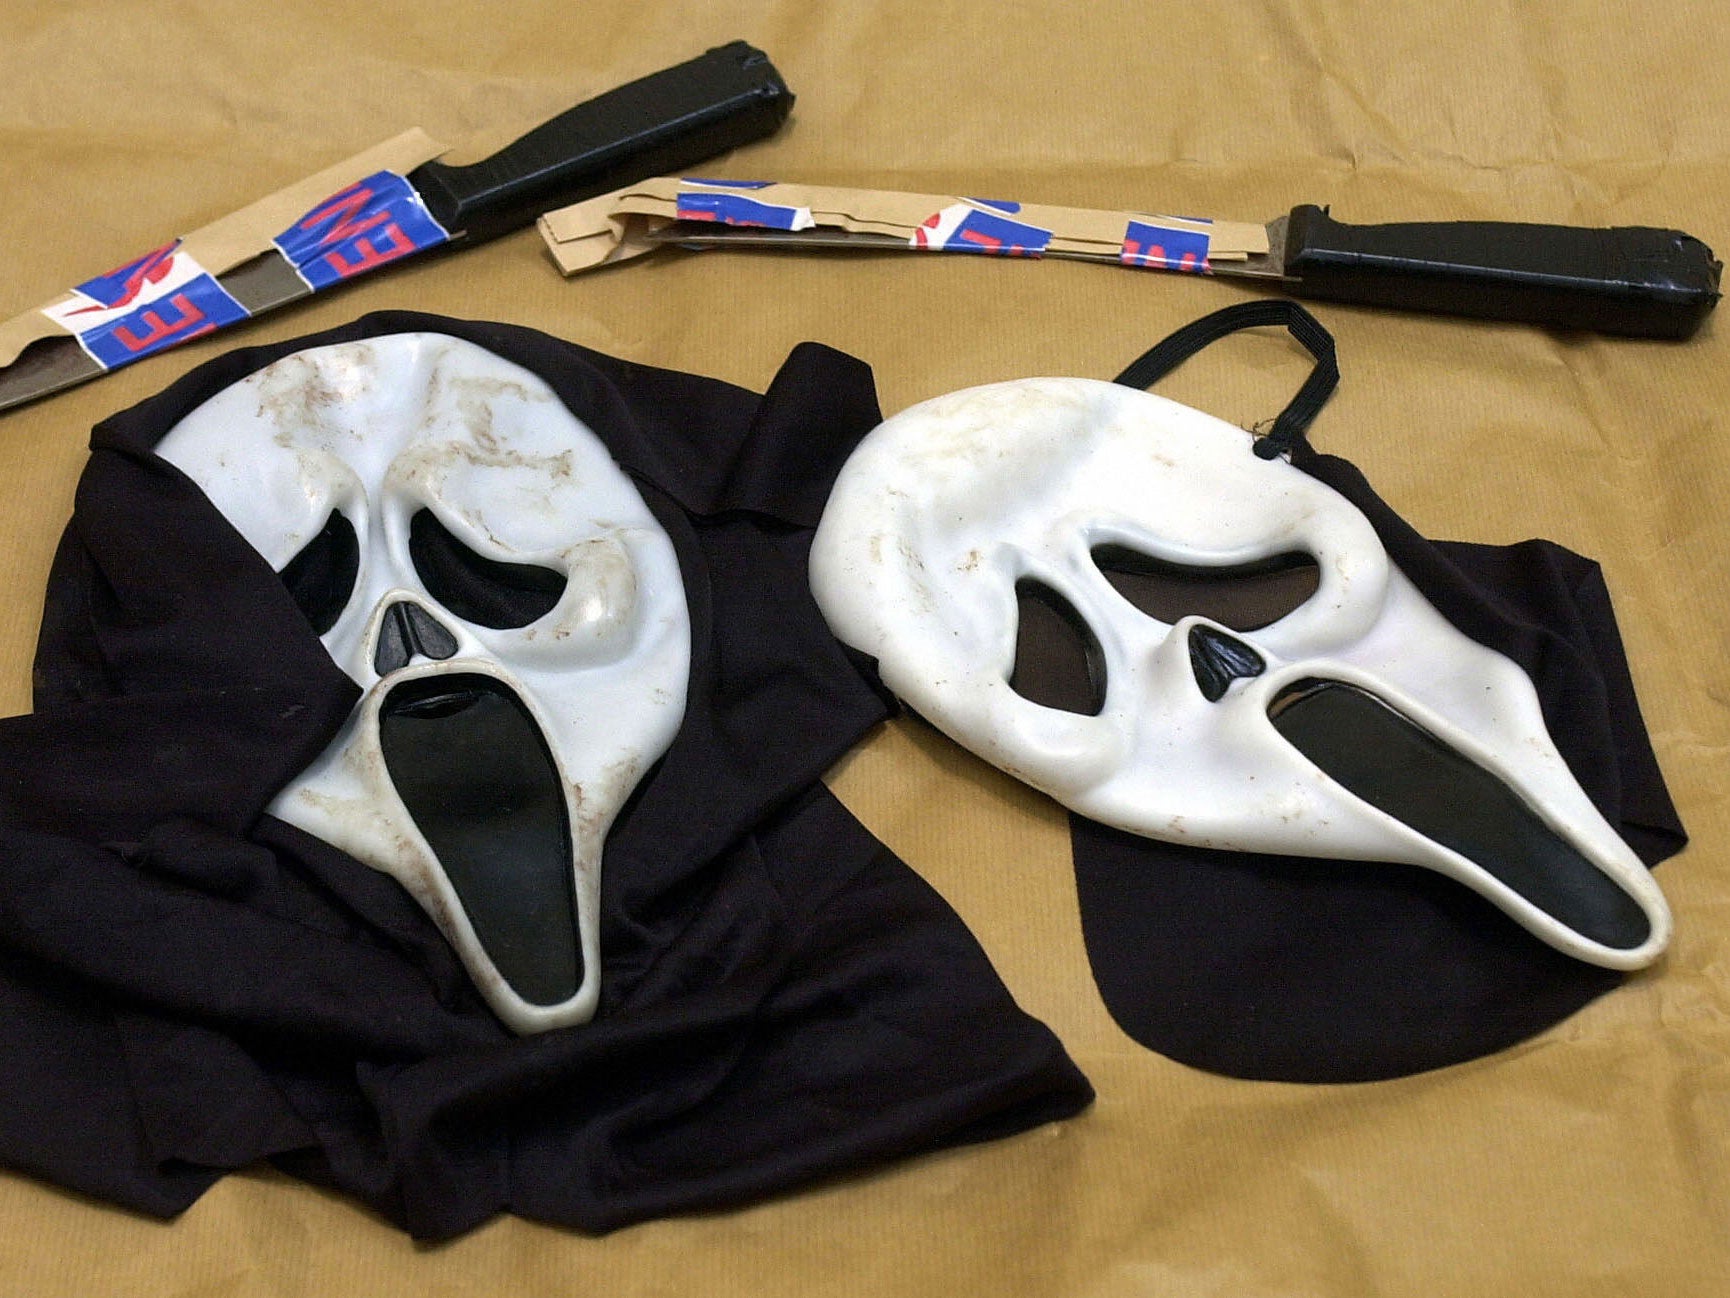 Myloh Jaqory Mason allegedly wore 'Scream' masks during his robberies